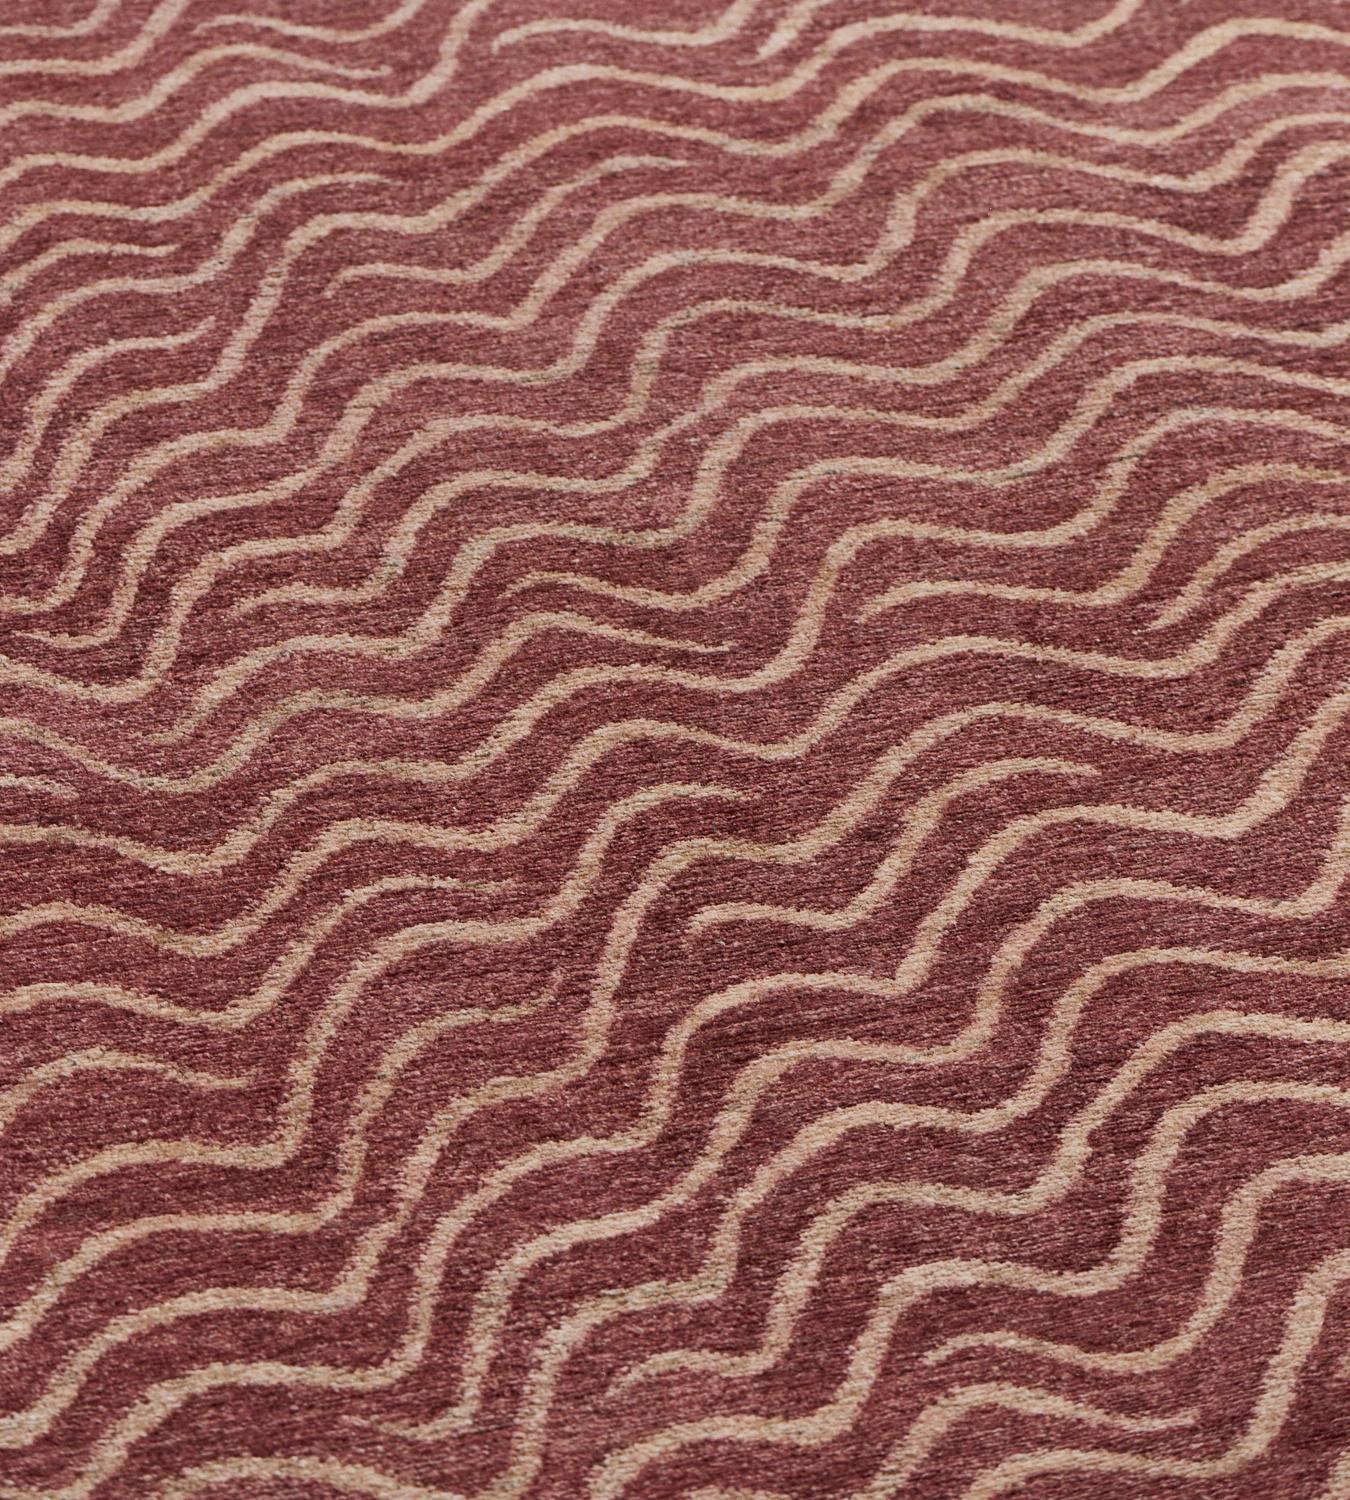 Part of the Mansour Modern collection, this wool and hemp rug is handwoven by master weavers using the finest quality techniques and materials. Measures: 8x10.